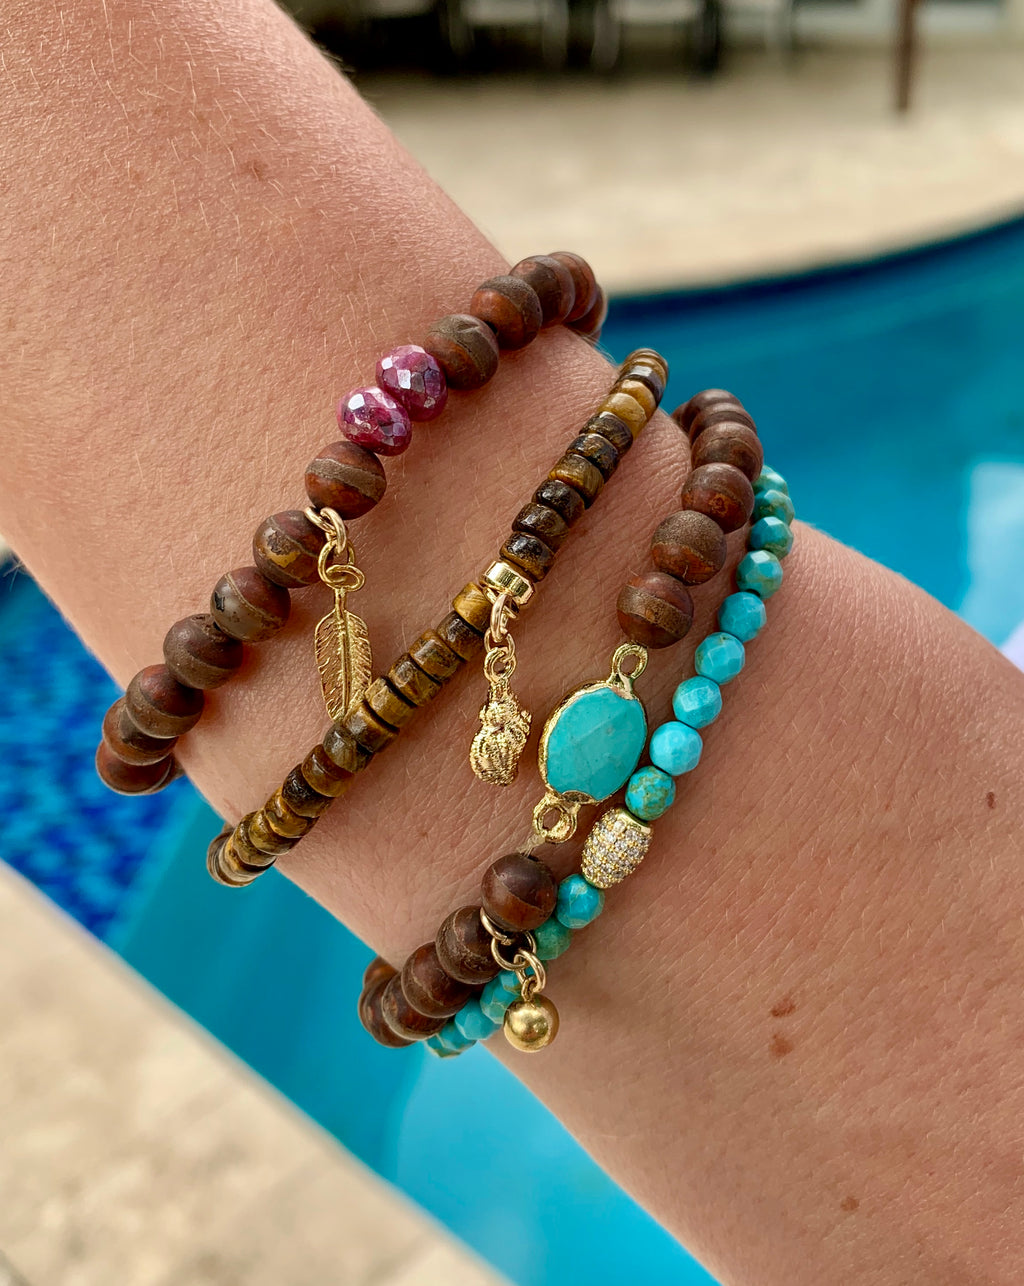 Tiger's Eye, Turquoise and Agate Bracelets